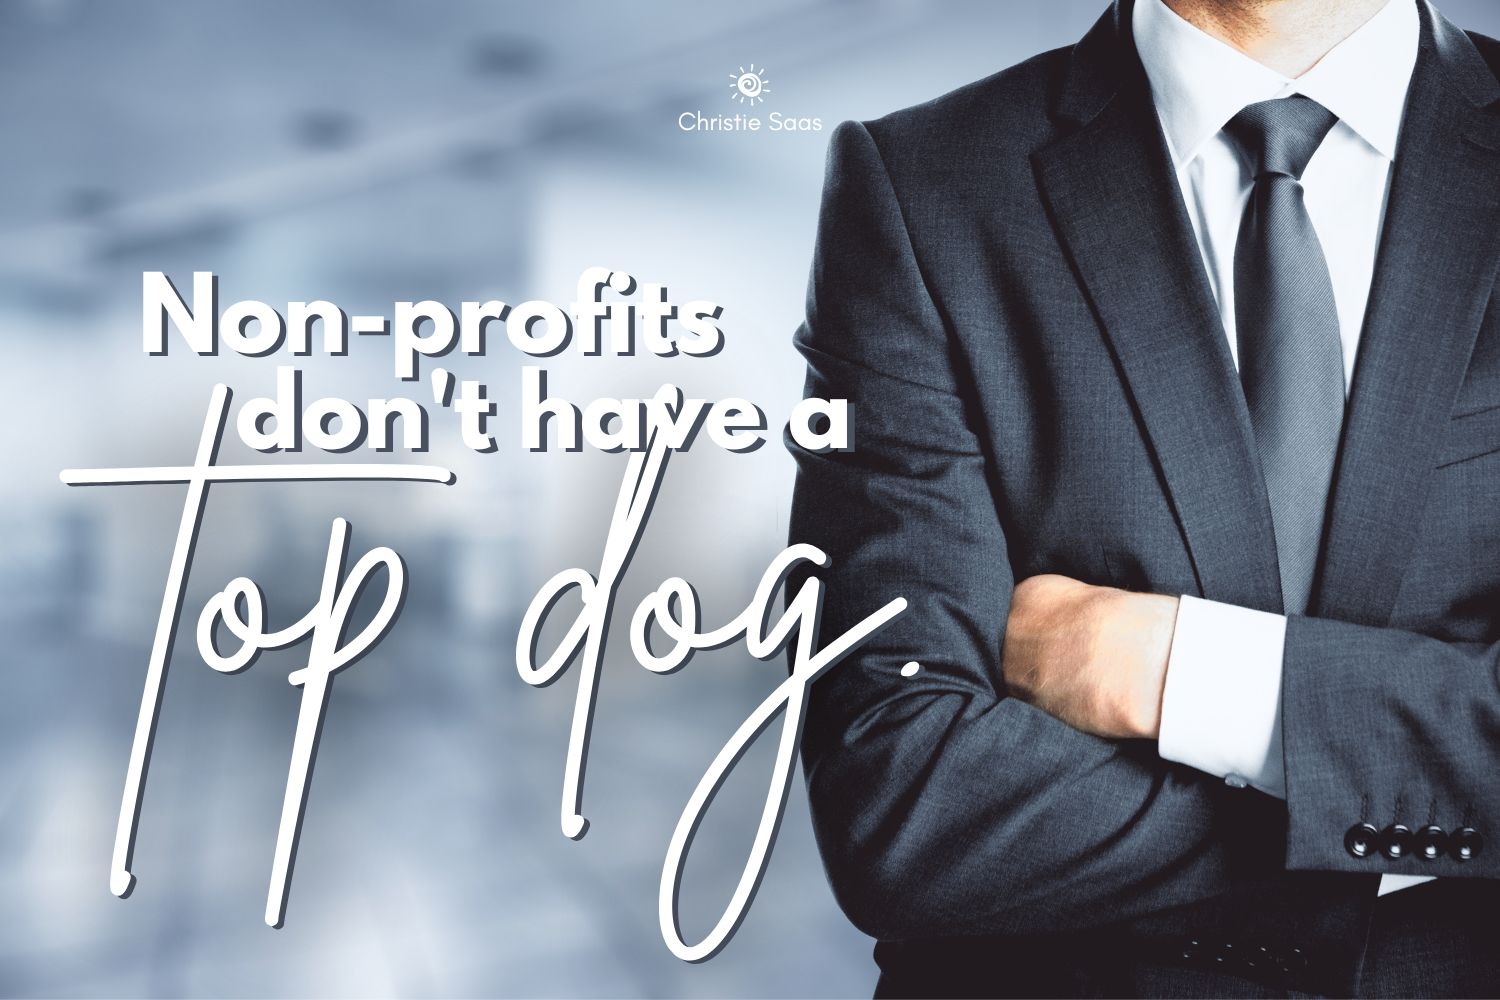 Non-profits don’t have a top dog